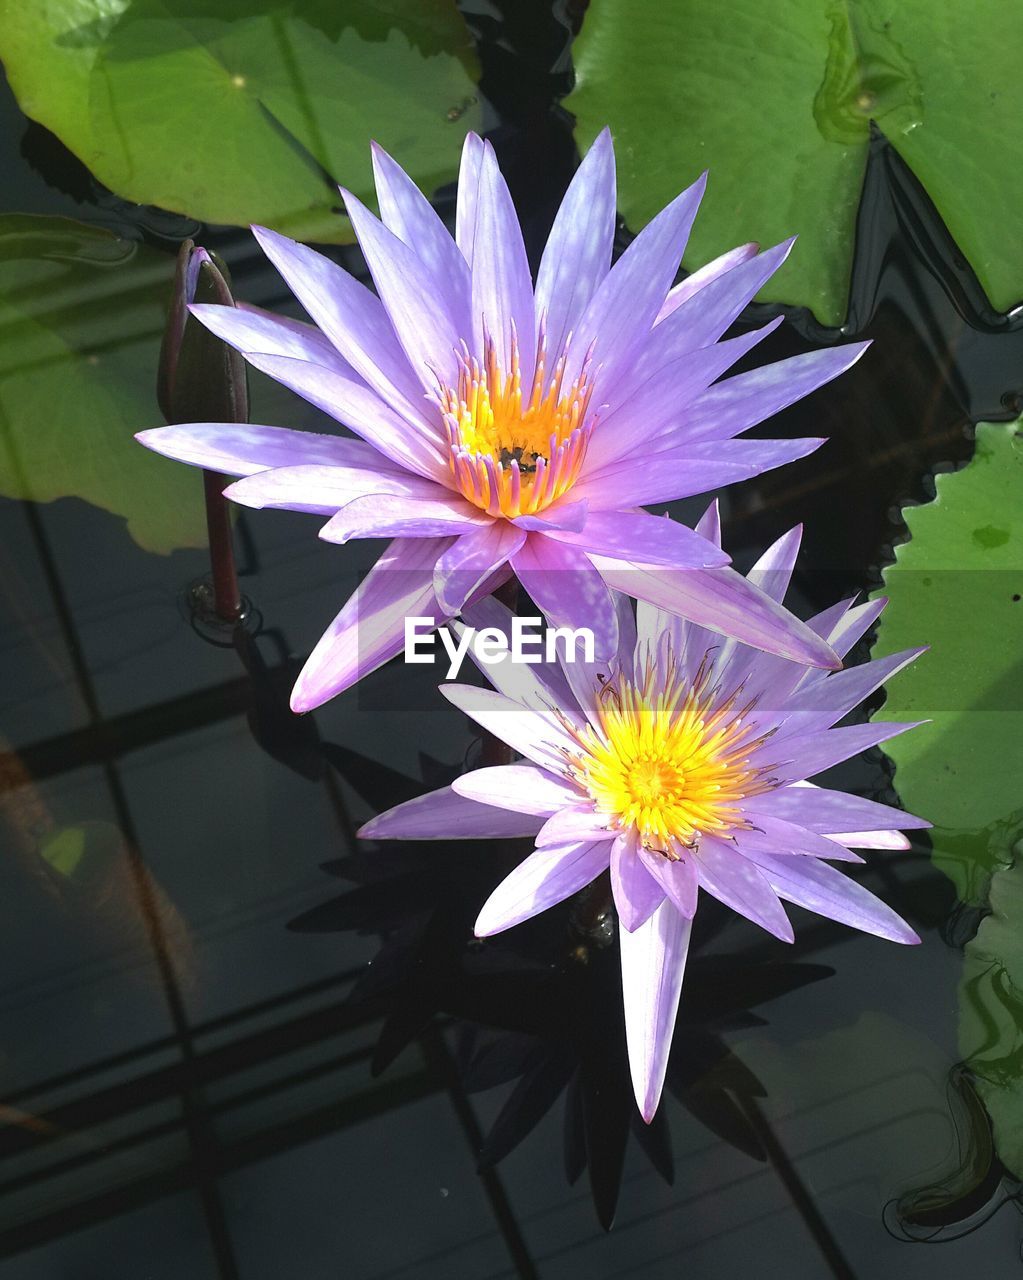 CLOSE-UP OF LOTUS WATER LILY BLOOMING IN POND